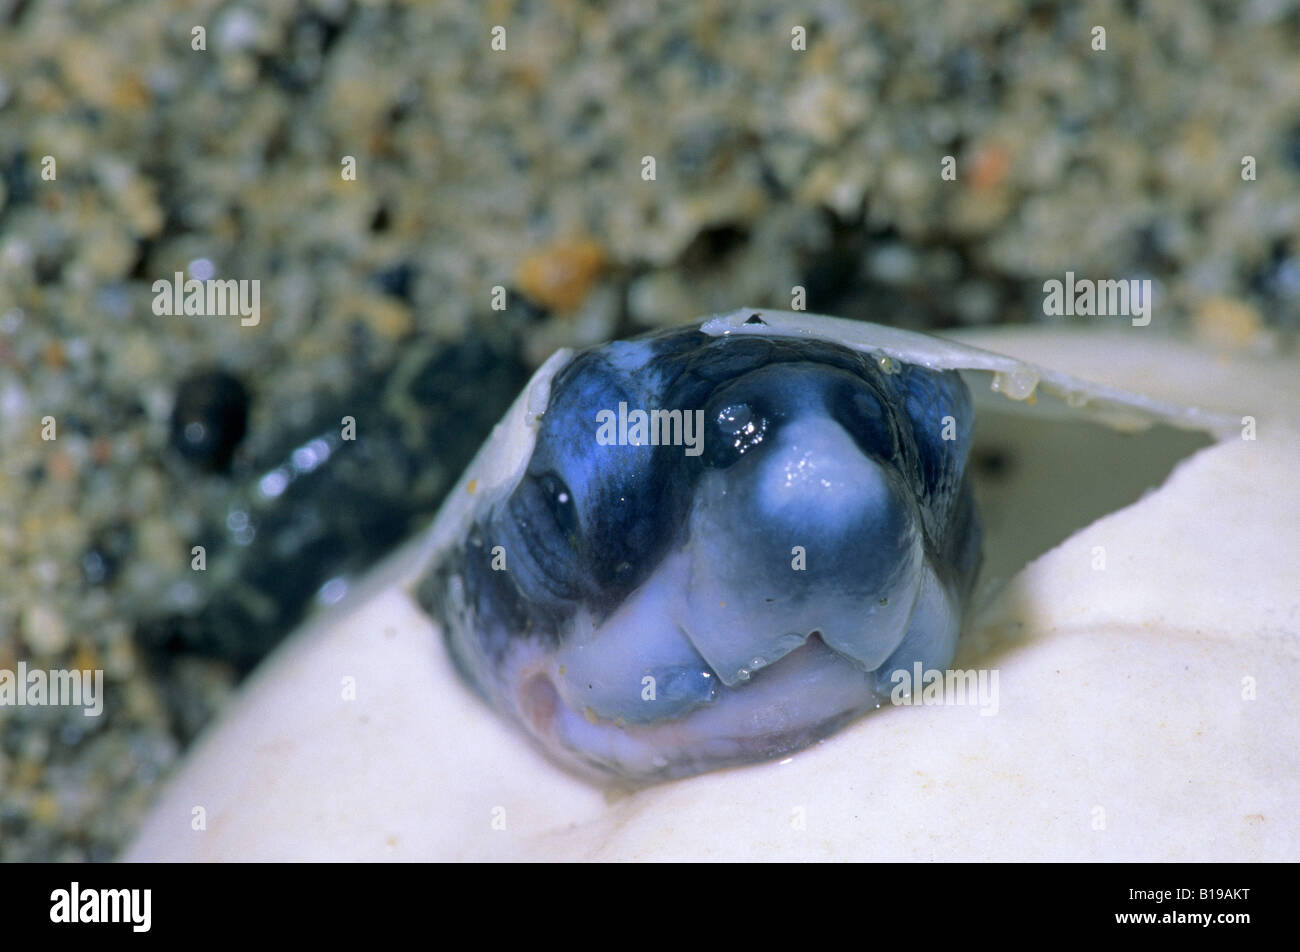 Hatchling leatherback sea turtle (Dermochelys coriacea) breaking out of its egg, Trinidad. Stock Photo